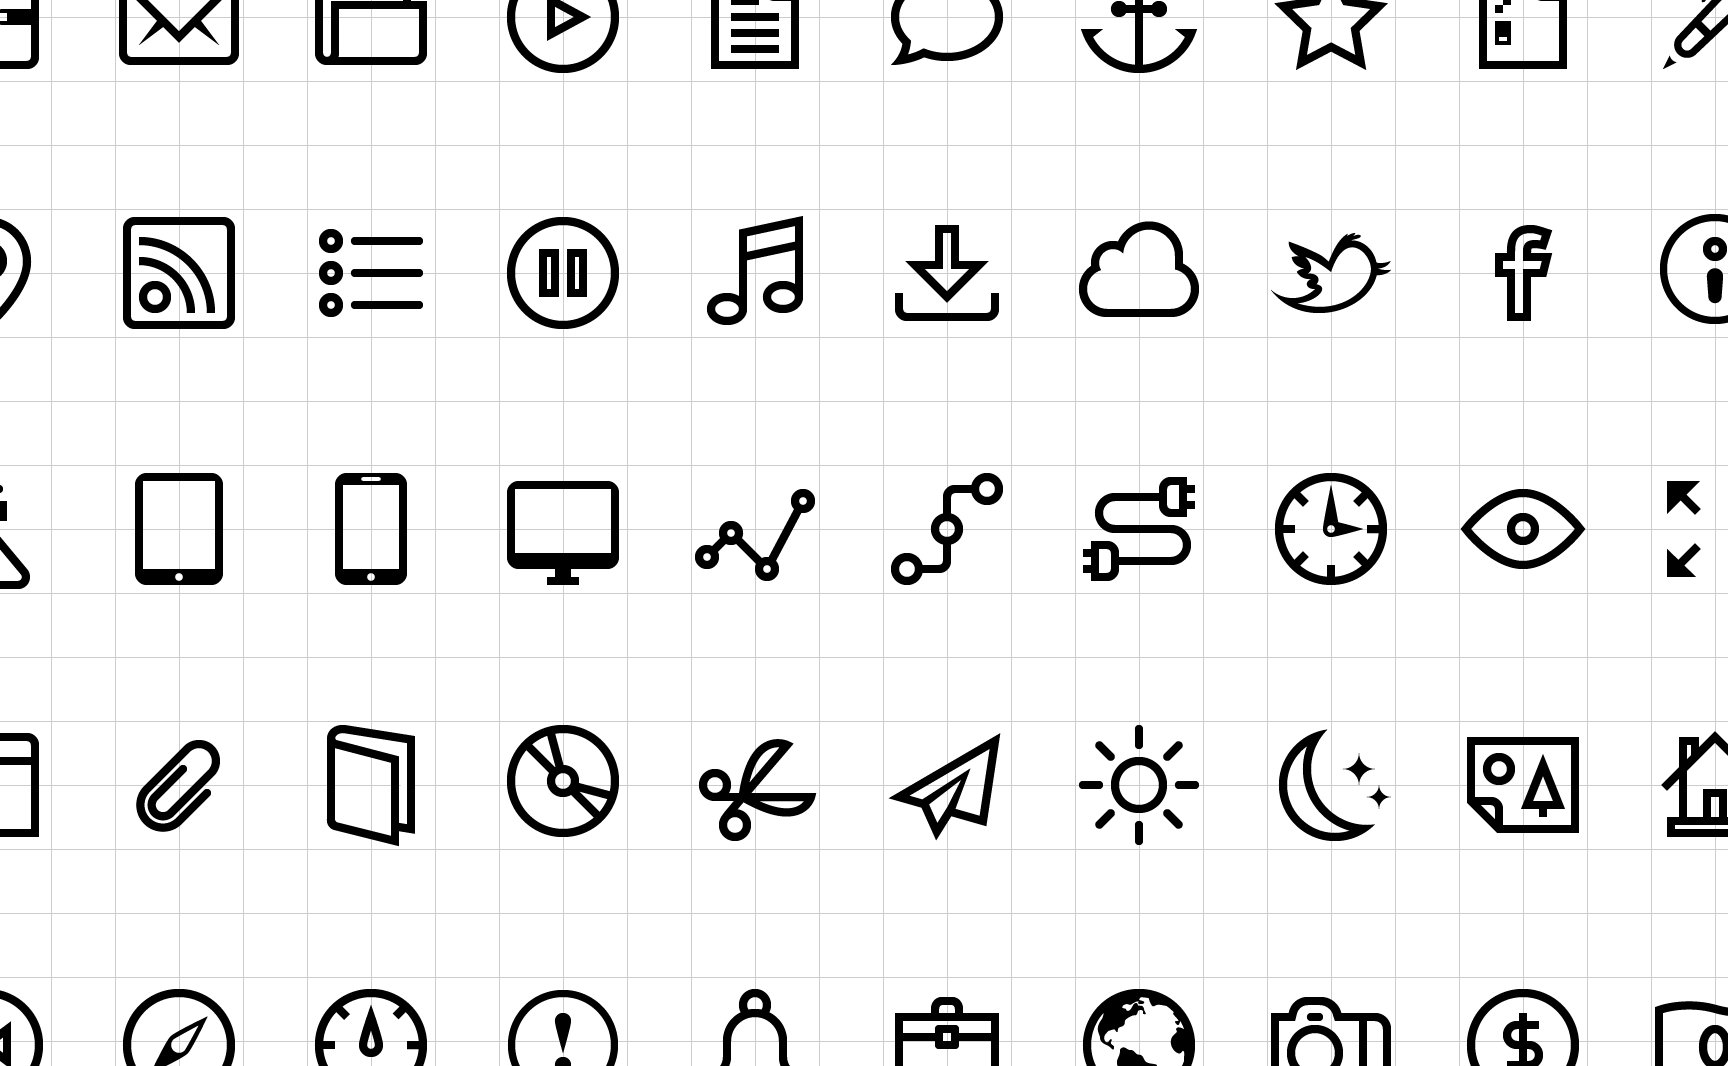 Introducing vIcons! Fully editable vector icons for PowerPoint.